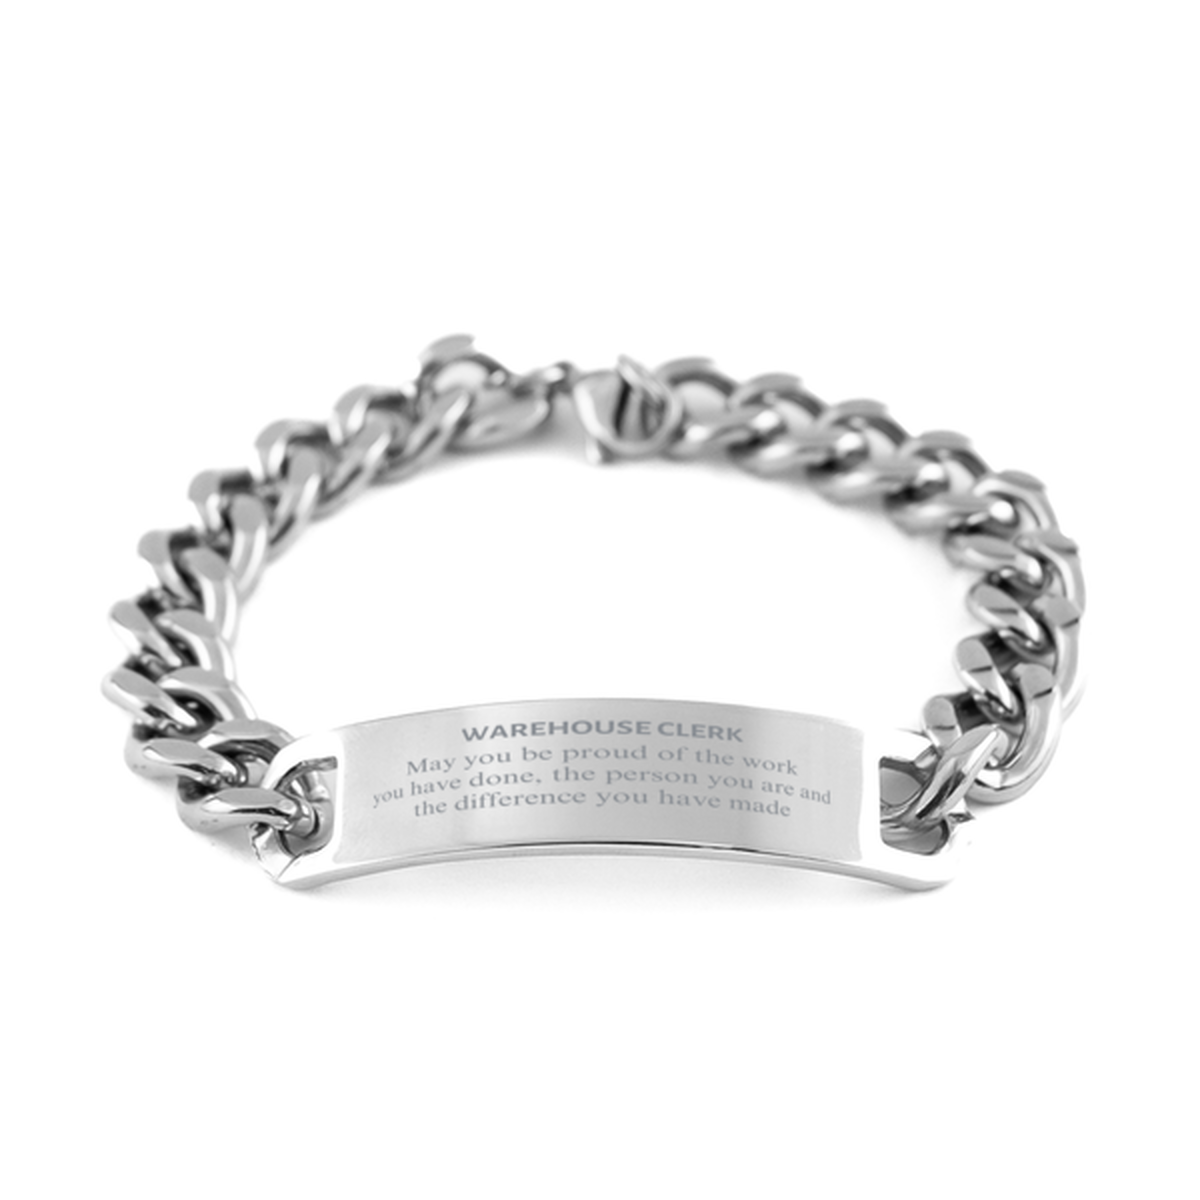 Warehouse Clerk May you be proud of the work you have done, Retirement Warehouse Clerk Cuban Chain Stainless Steel Bracelet for Colleague Appreciation Gifts Amazing for Warehouse Clerk